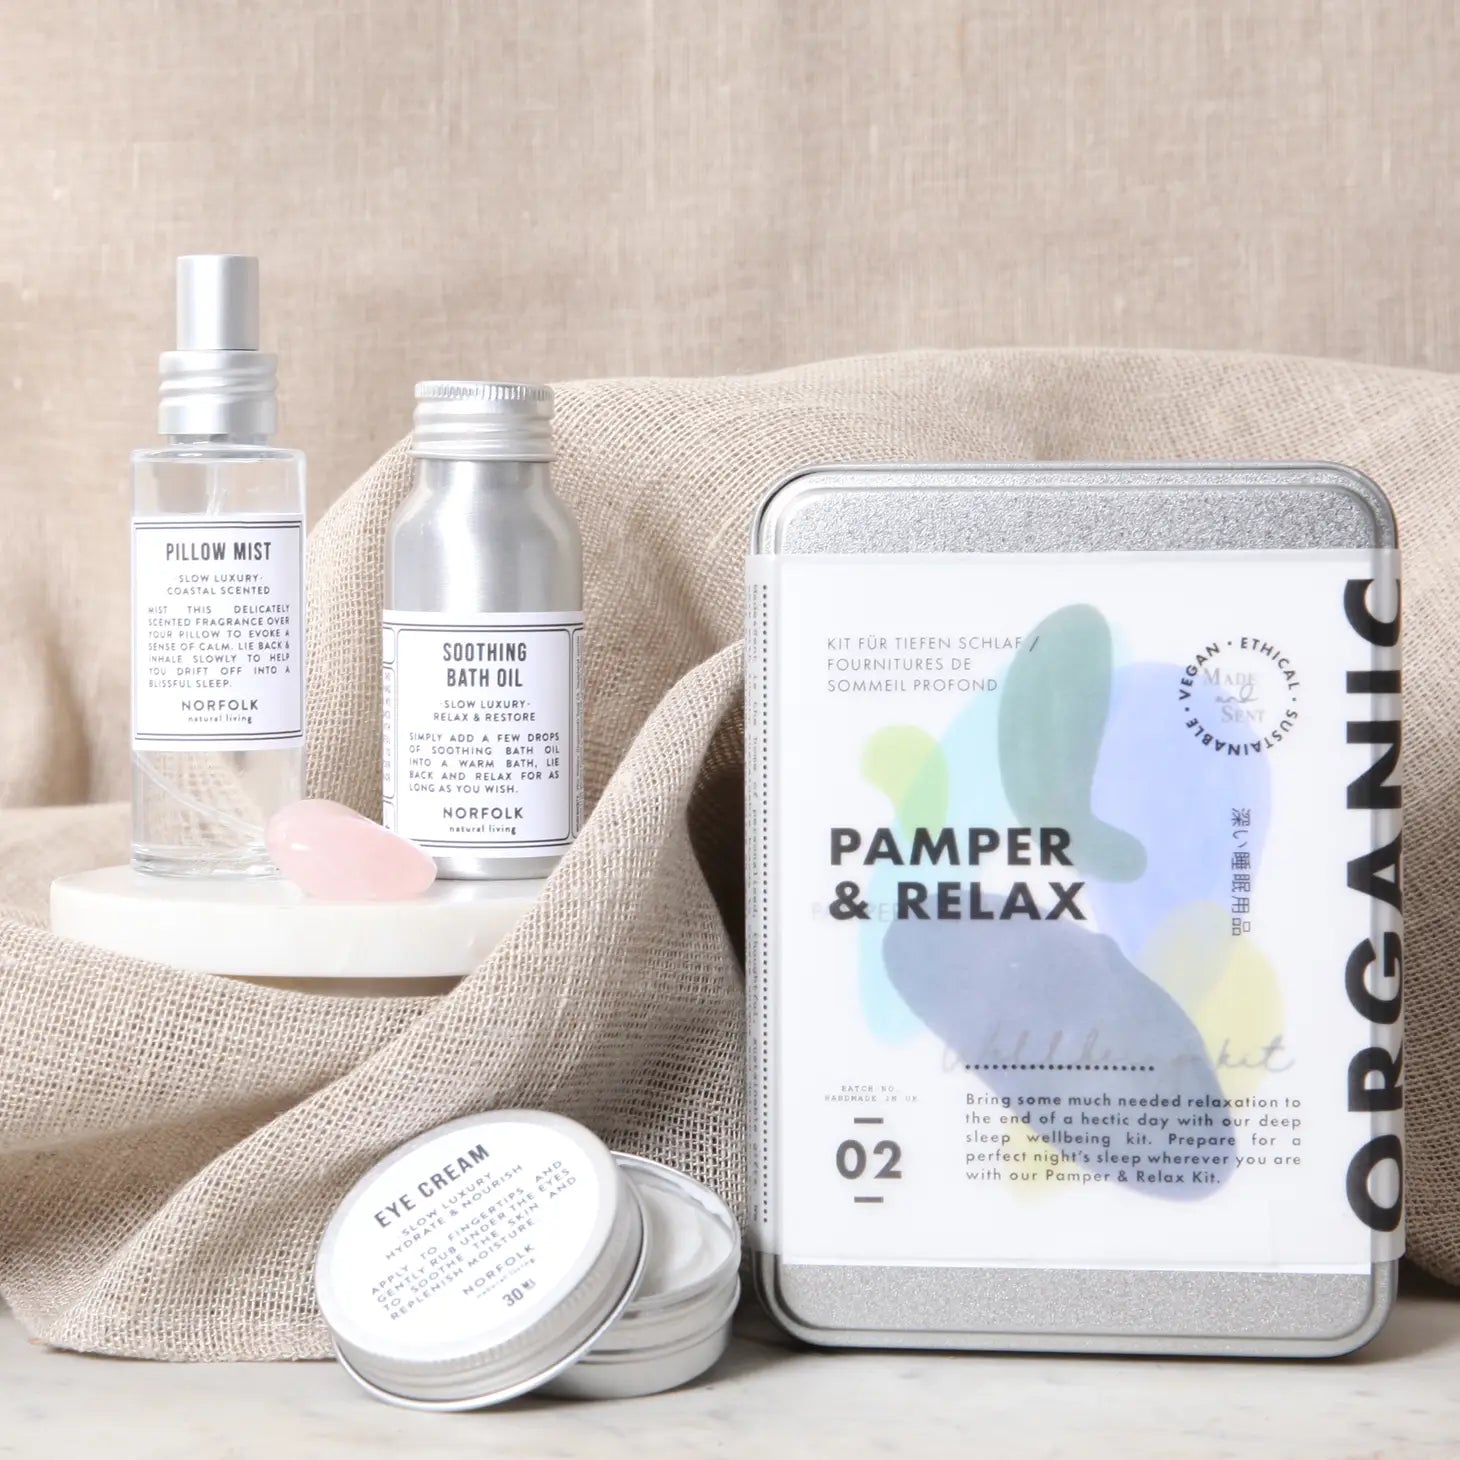 Pamper & Relax Wellbeing Kit